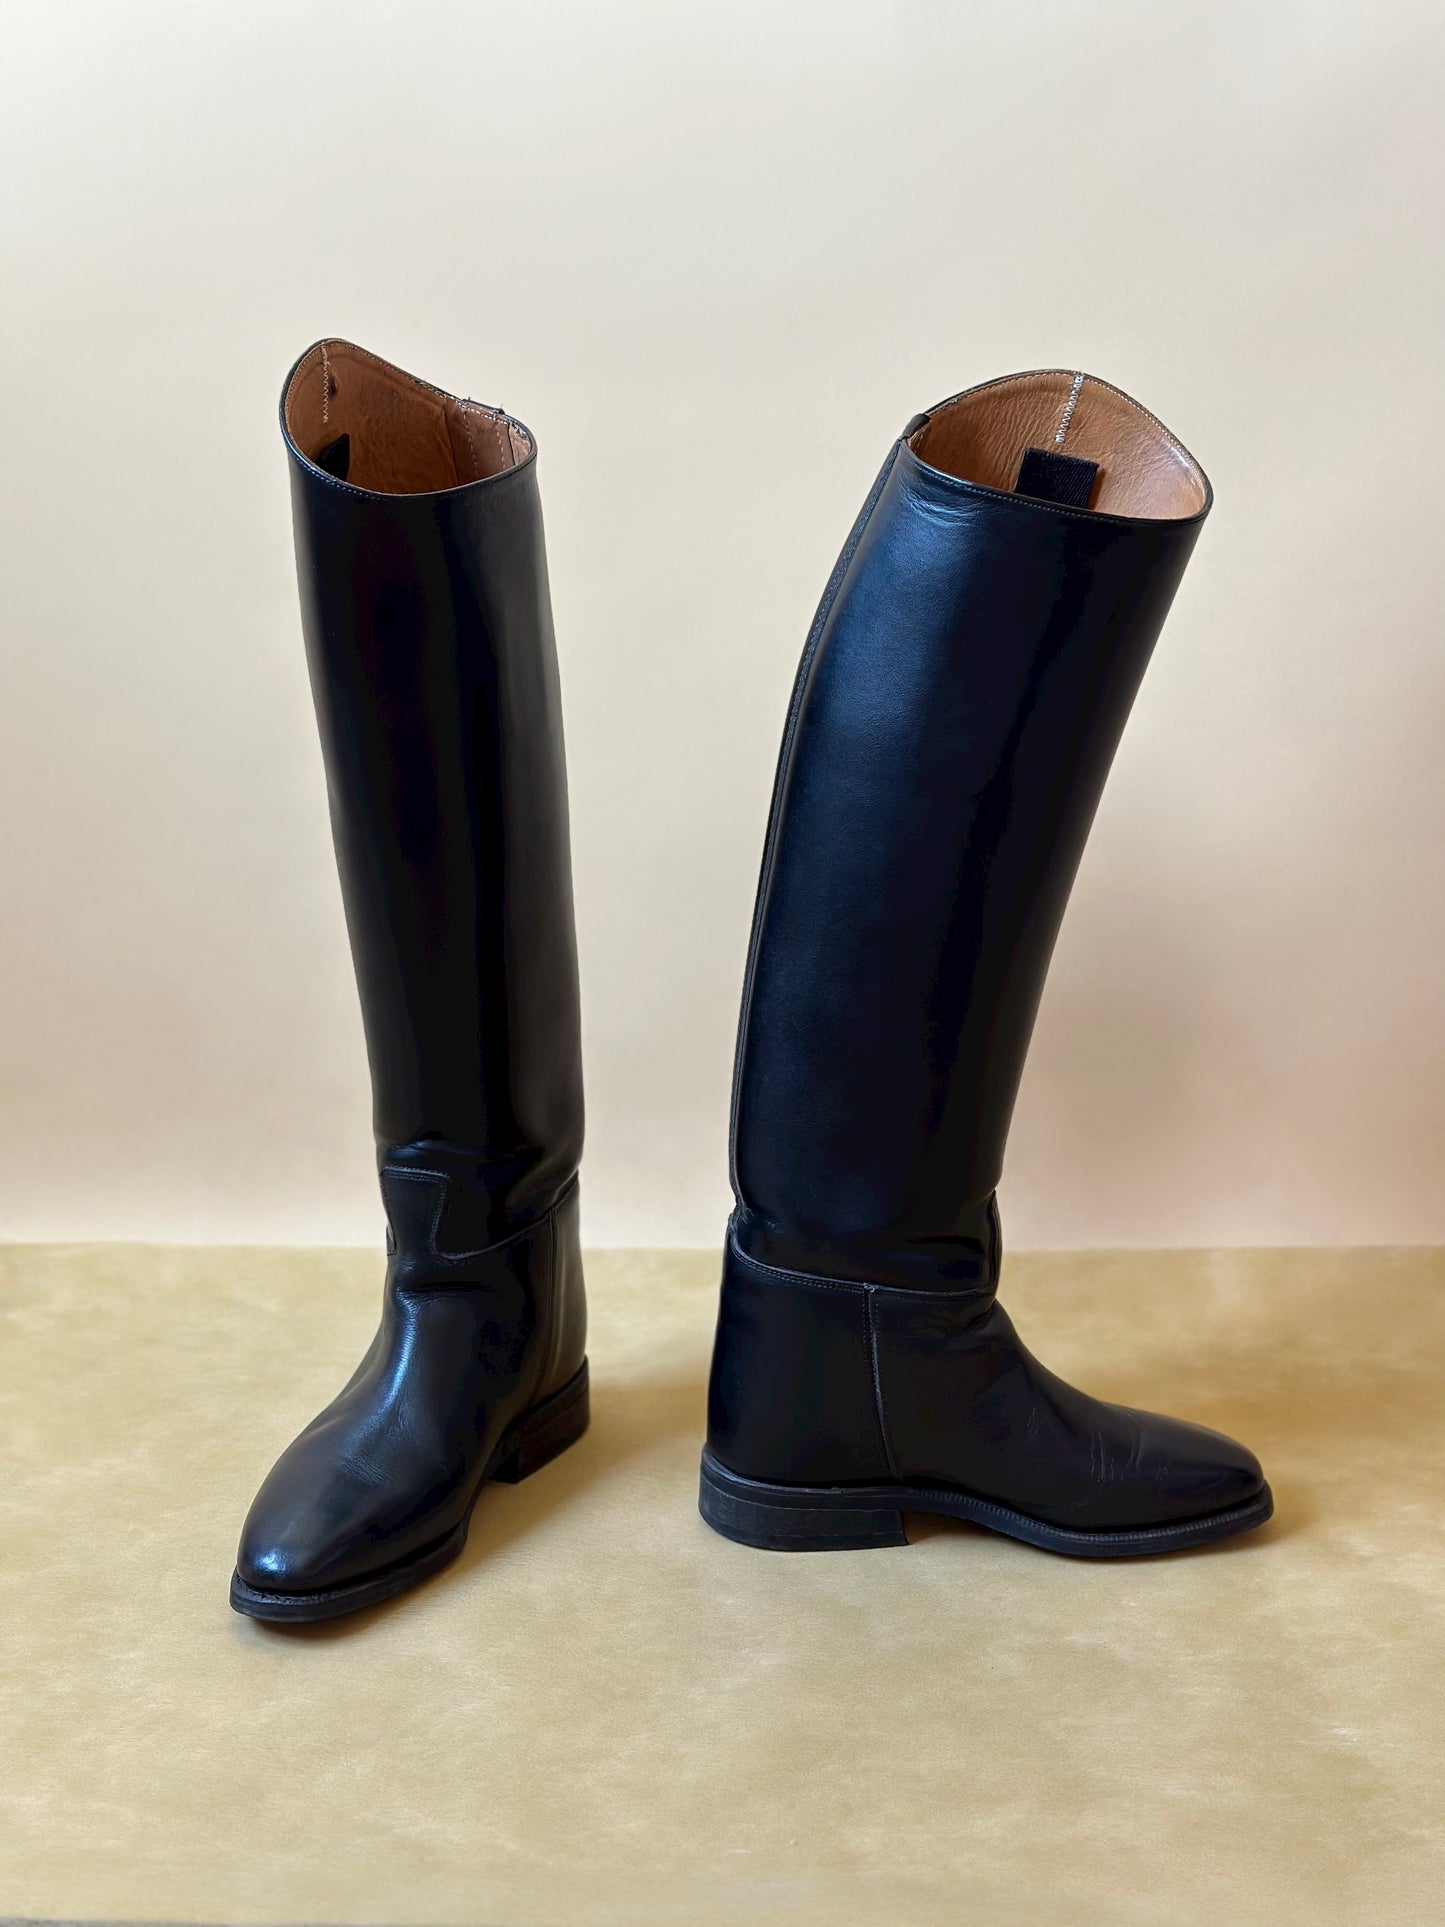 Vintage Black Leather Riding Boots n. 37 IT